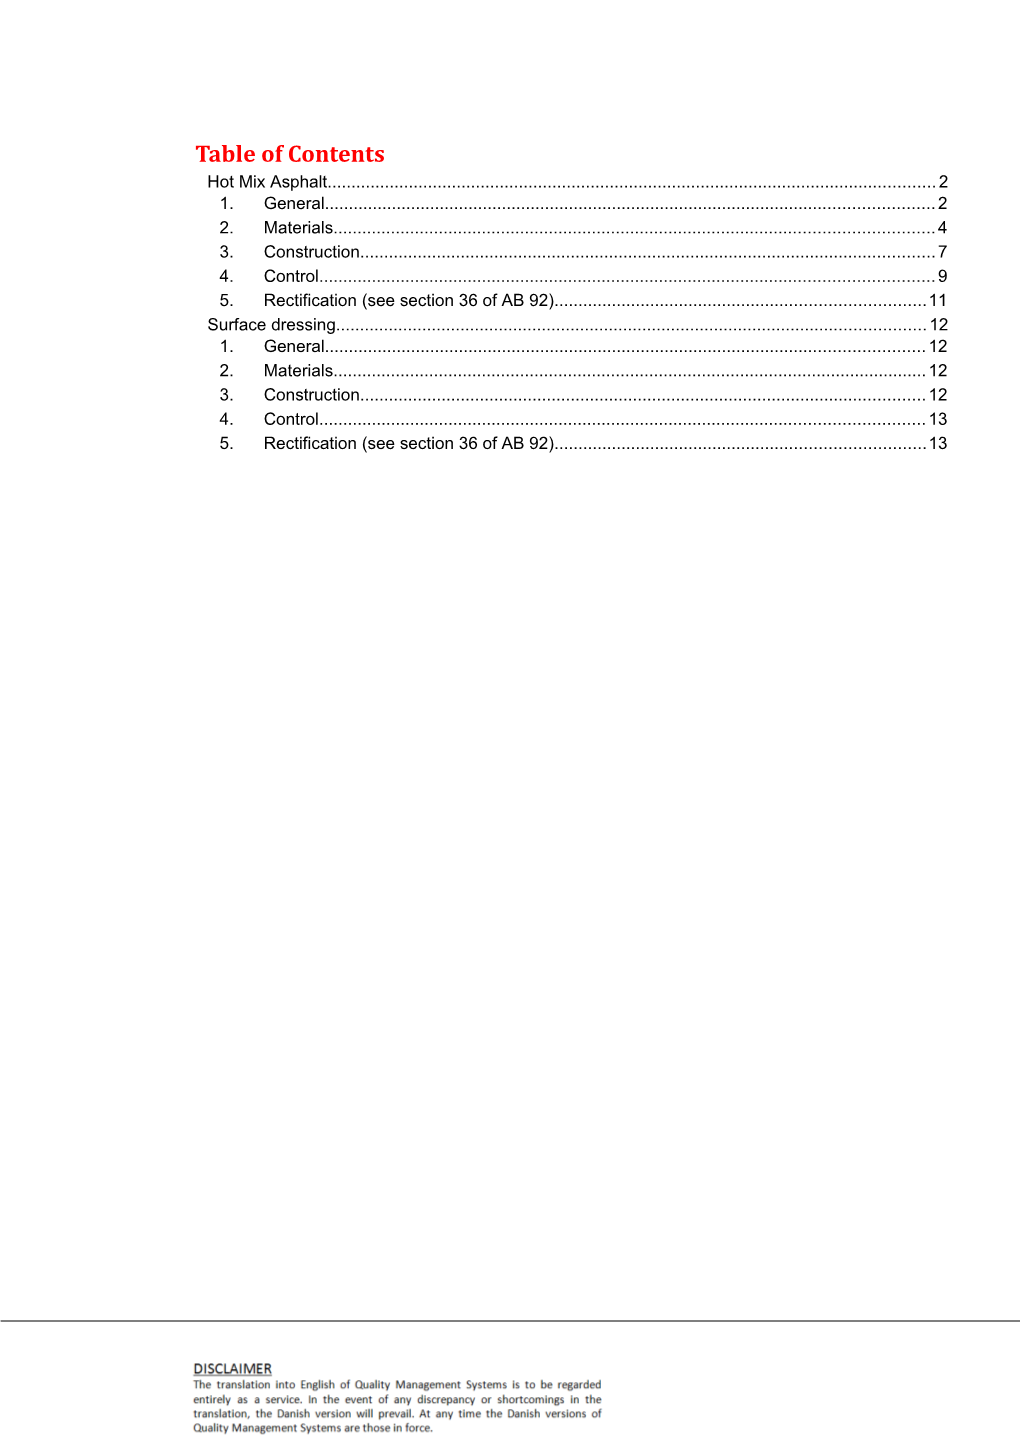 Table of Contents s490